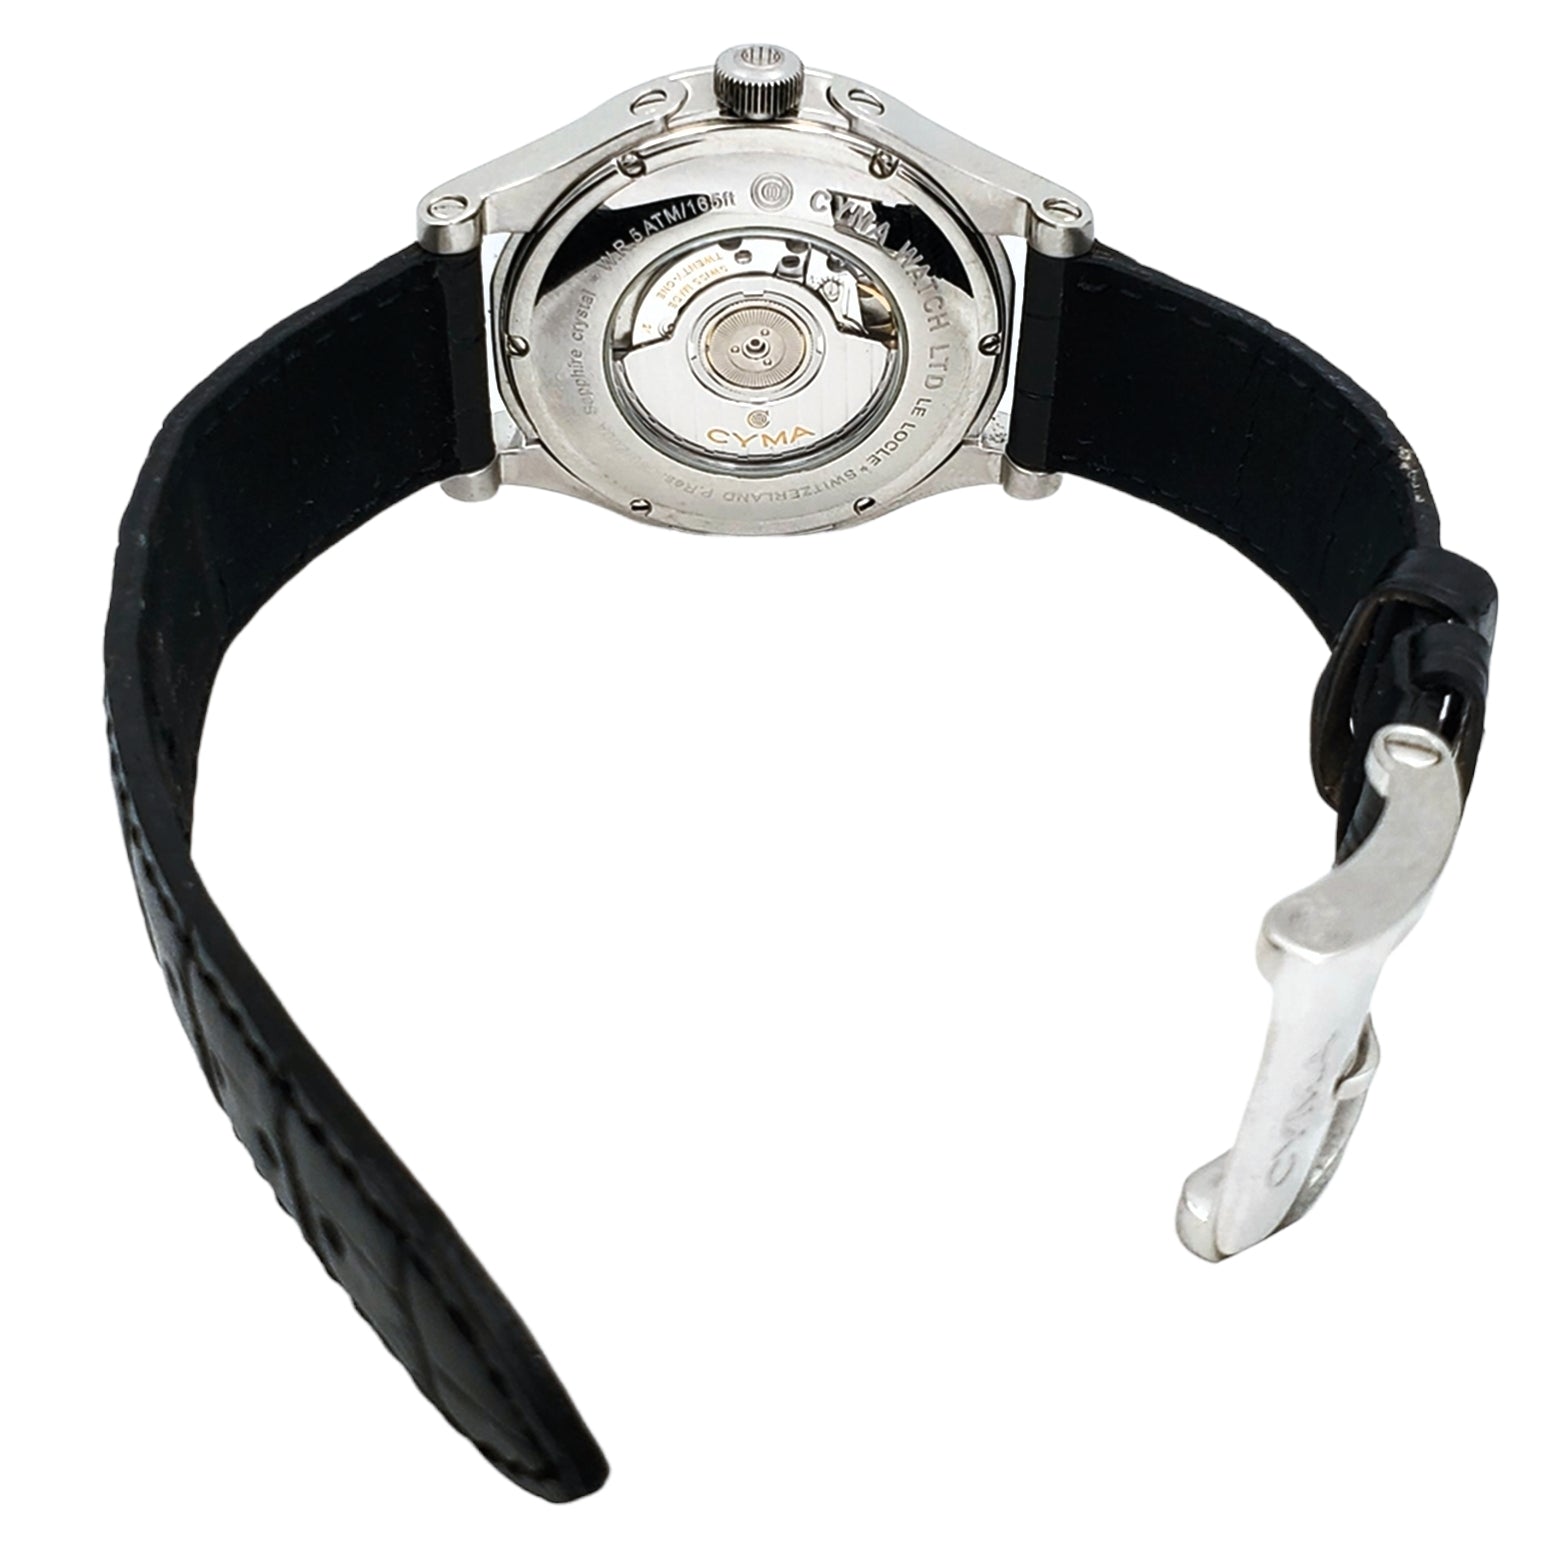 Men's CYMA Chronometer 40mm Imperium XL Stainless Steel Watch with Black Leather Band and Black Dial. (Pre-Owned)